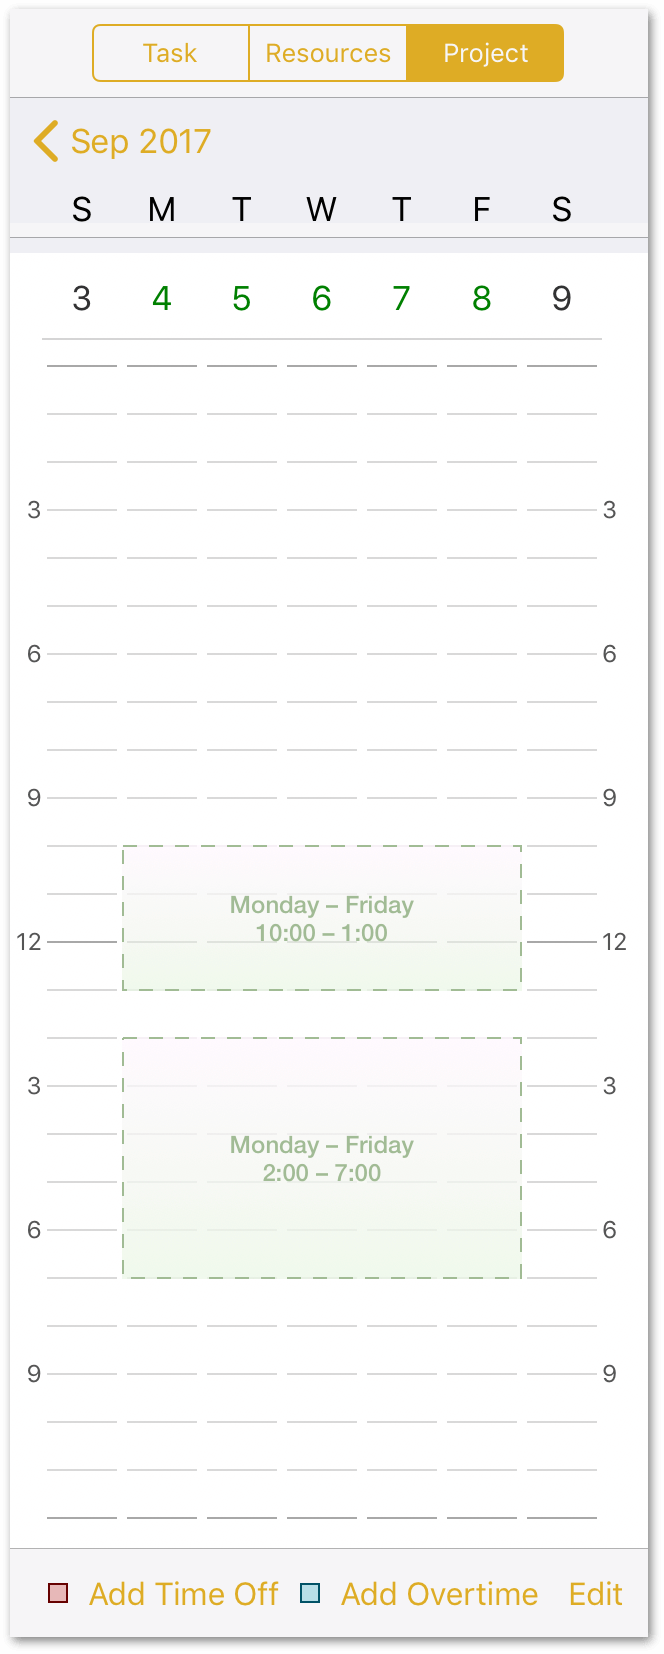 The Calendar shows the normal working hours as time blocks with a dashed border.